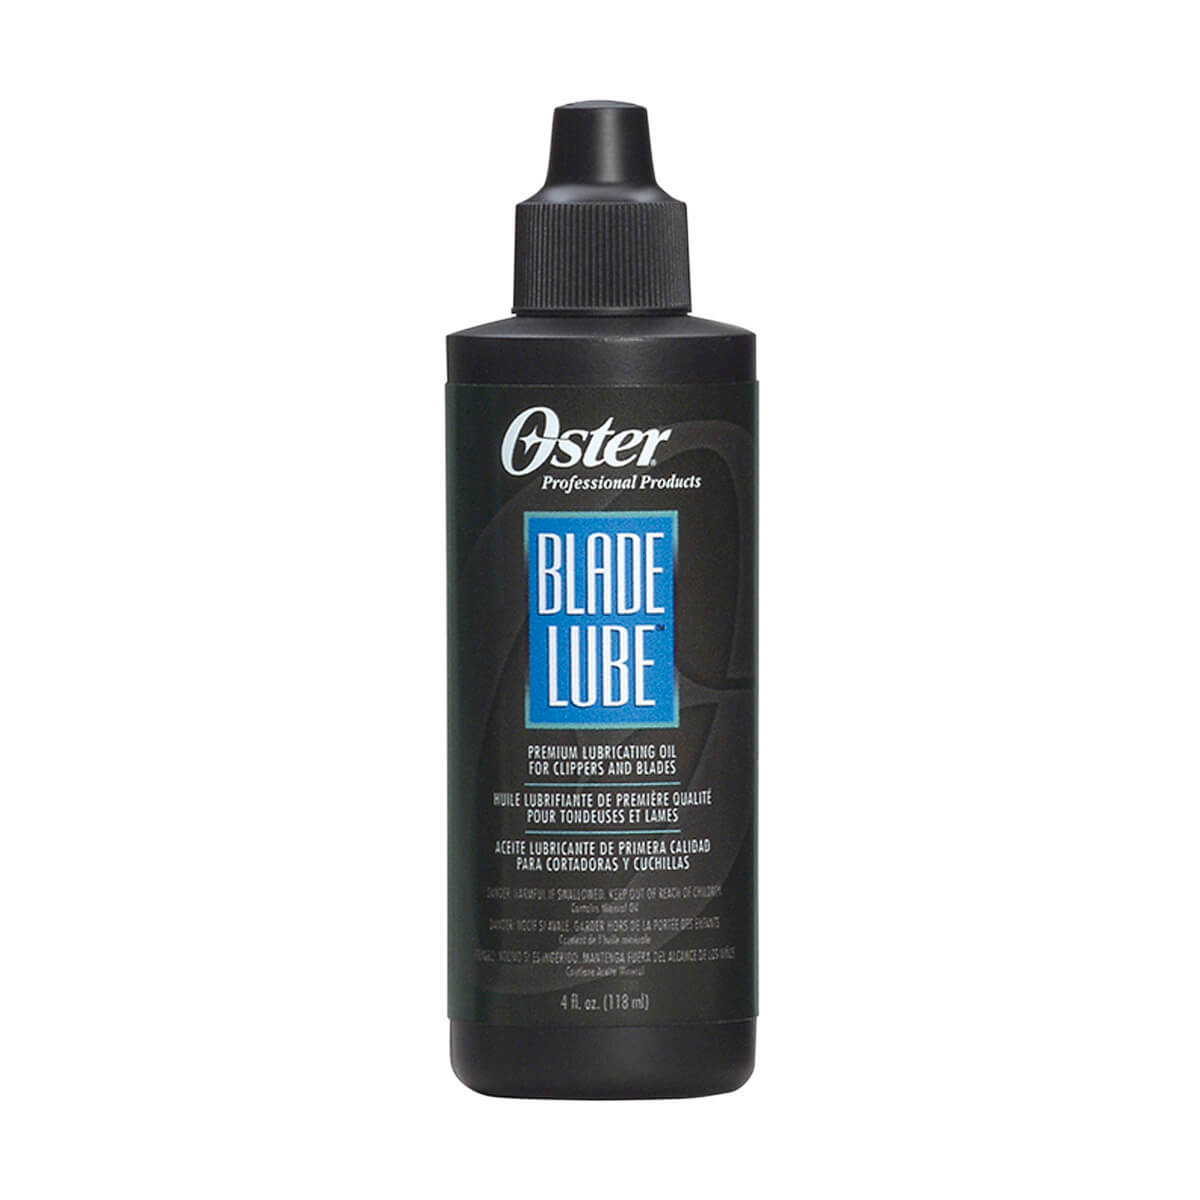 Oster® 4 oz Blade Lube Lubricating Oil